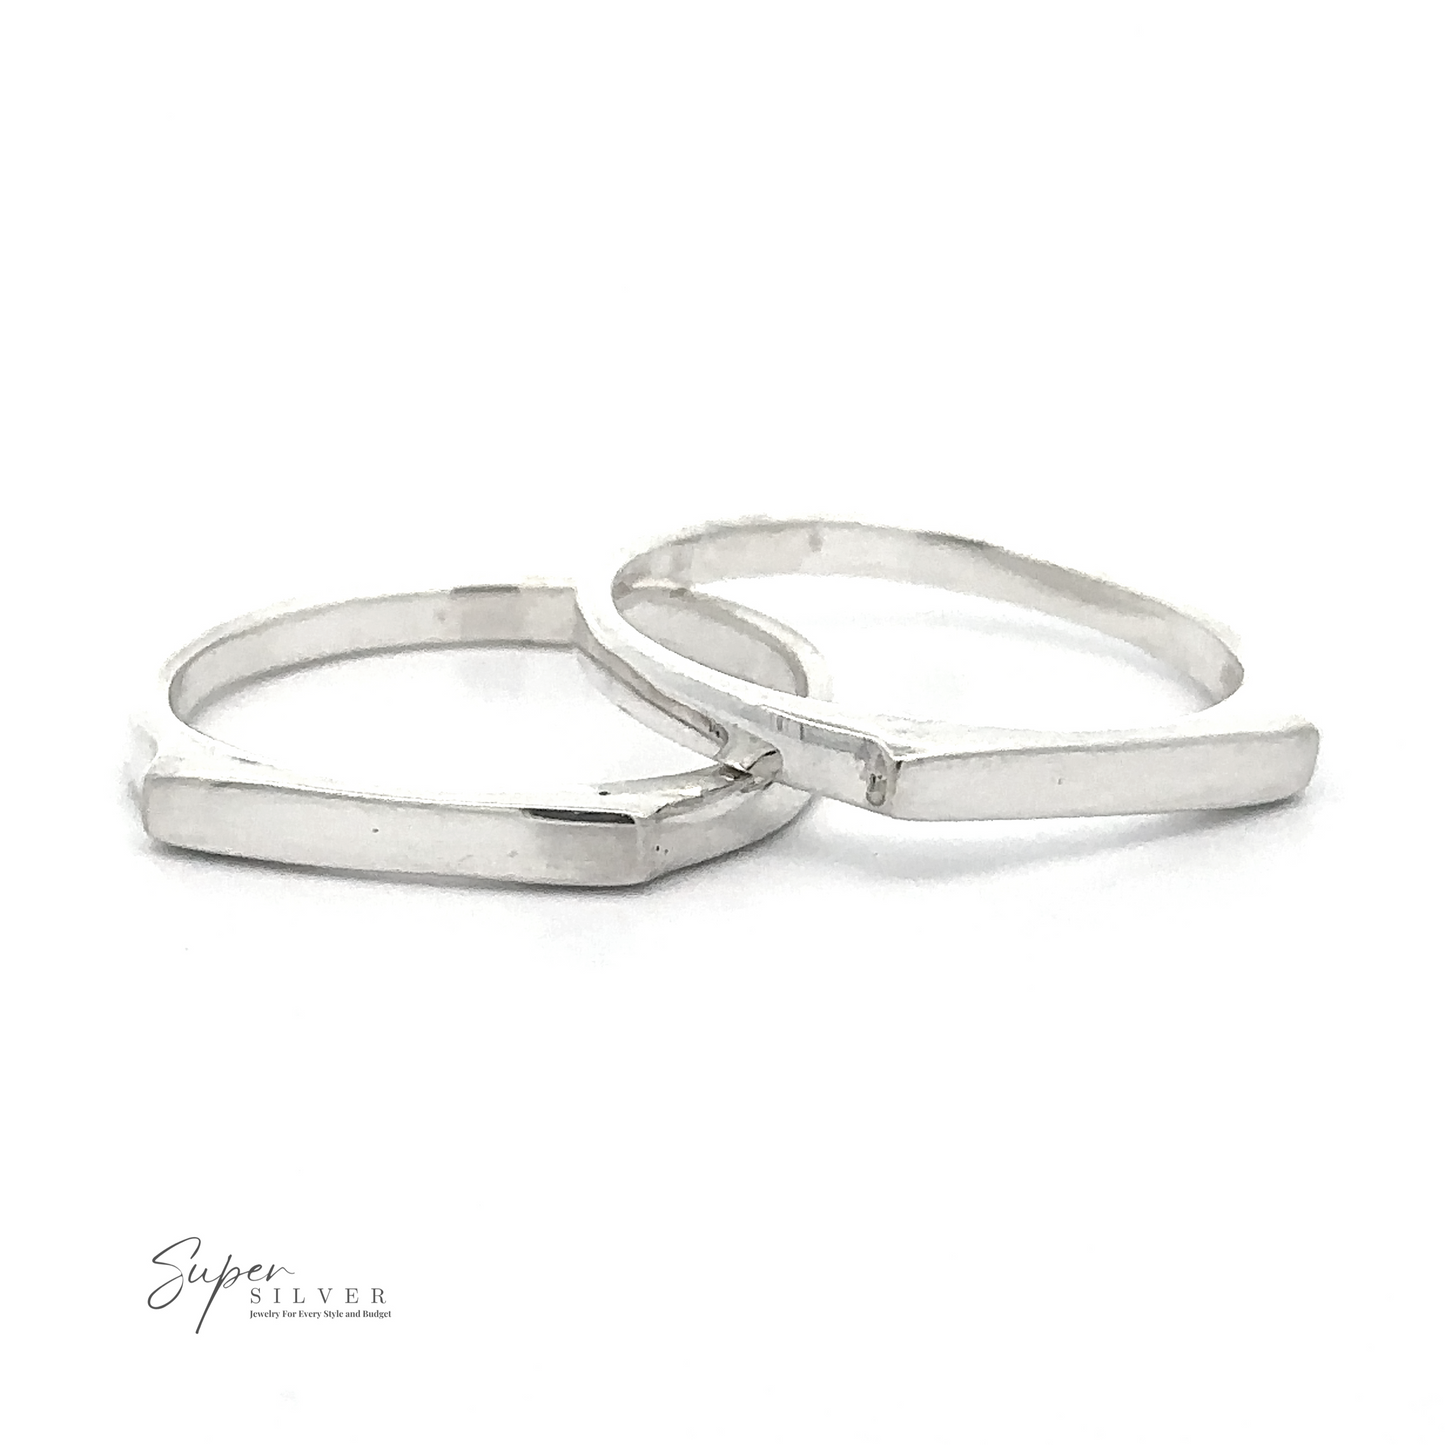 Two Dainty Silver Bar Rings with a geometric design are displayed against a white background. Embracing modern minimalism, the logo "Super Silver" is seen in the lower left corner.